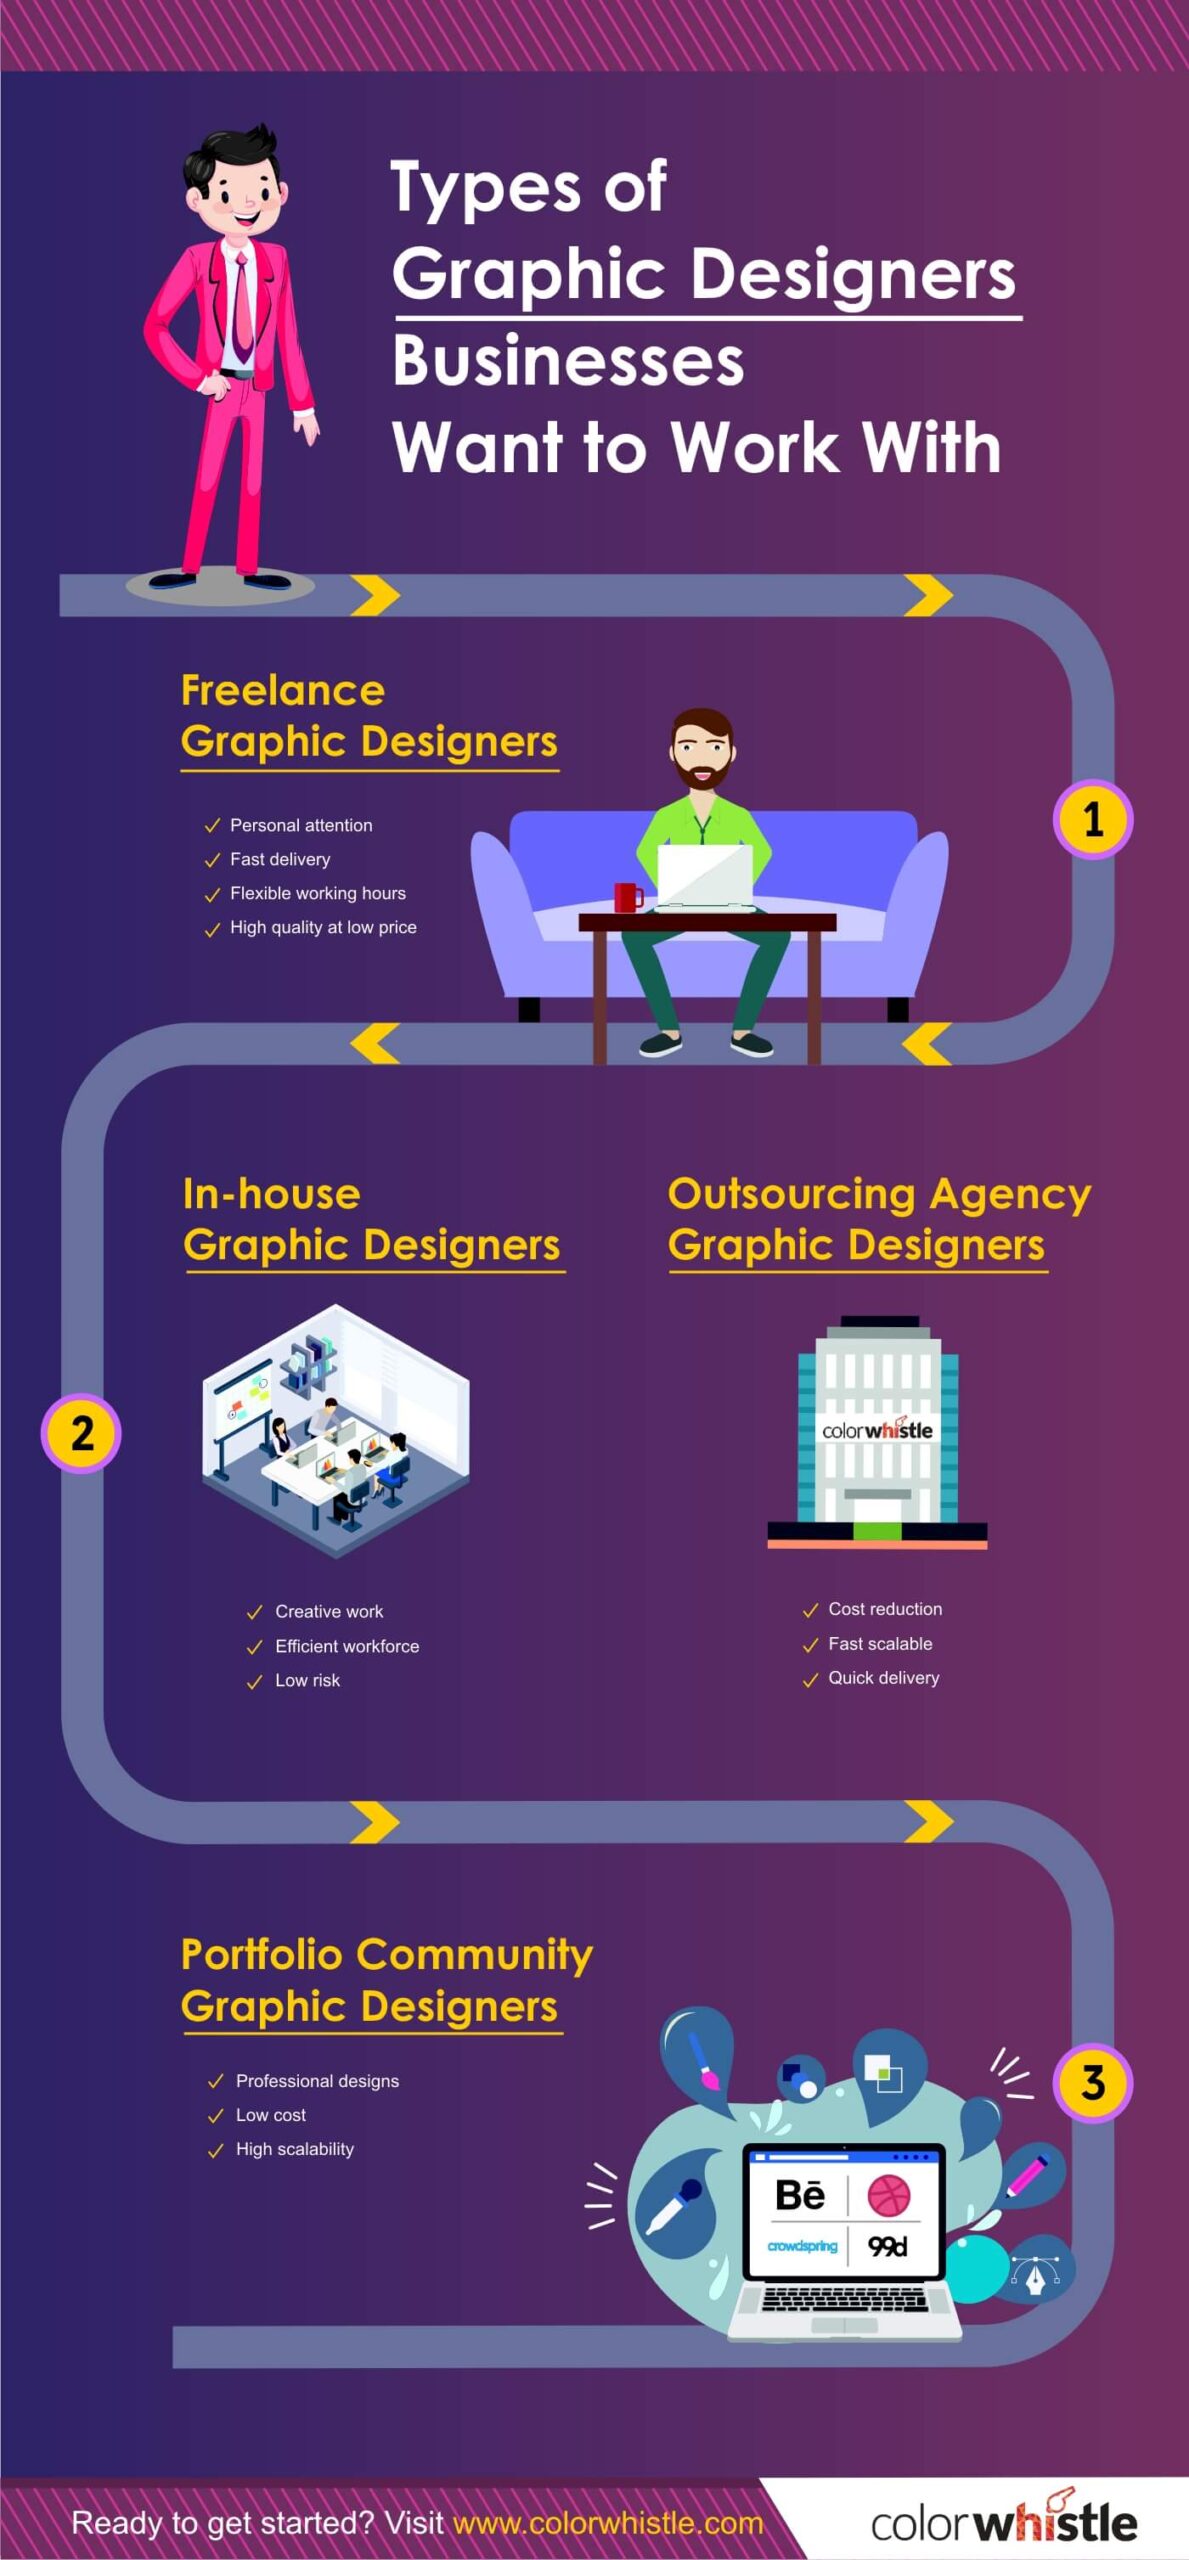 Social Media Graphics: Design Tips and Best Practices - Types of graphic Designers Businesses Want to Work with Infographic